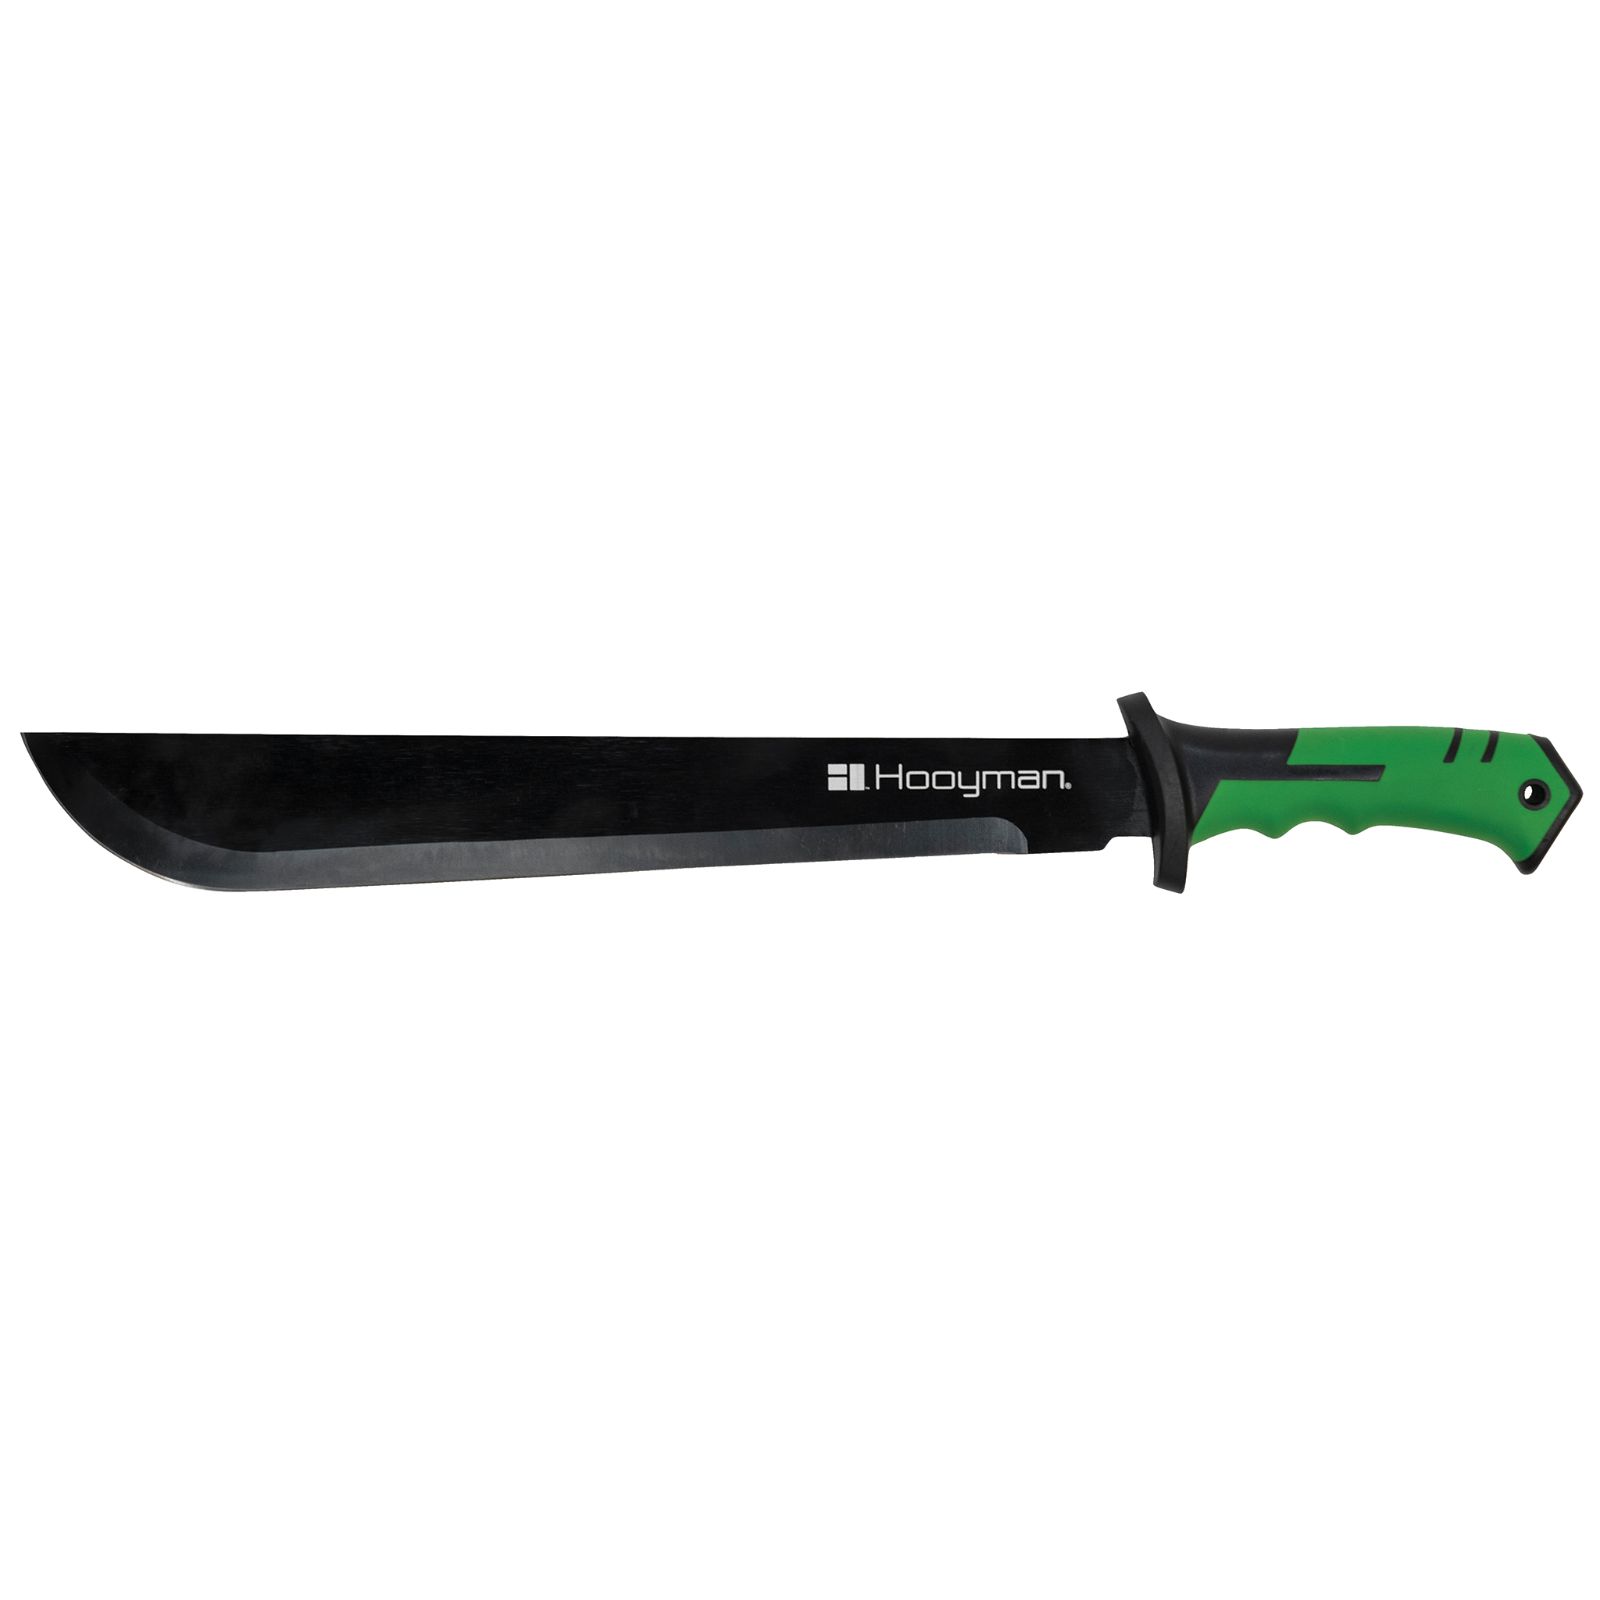 Hooyman Bush Machete is part of the expanding the line of products into tools built for every aspect of land management. Each tool is designed with purpose to deliver the best performance for the task...